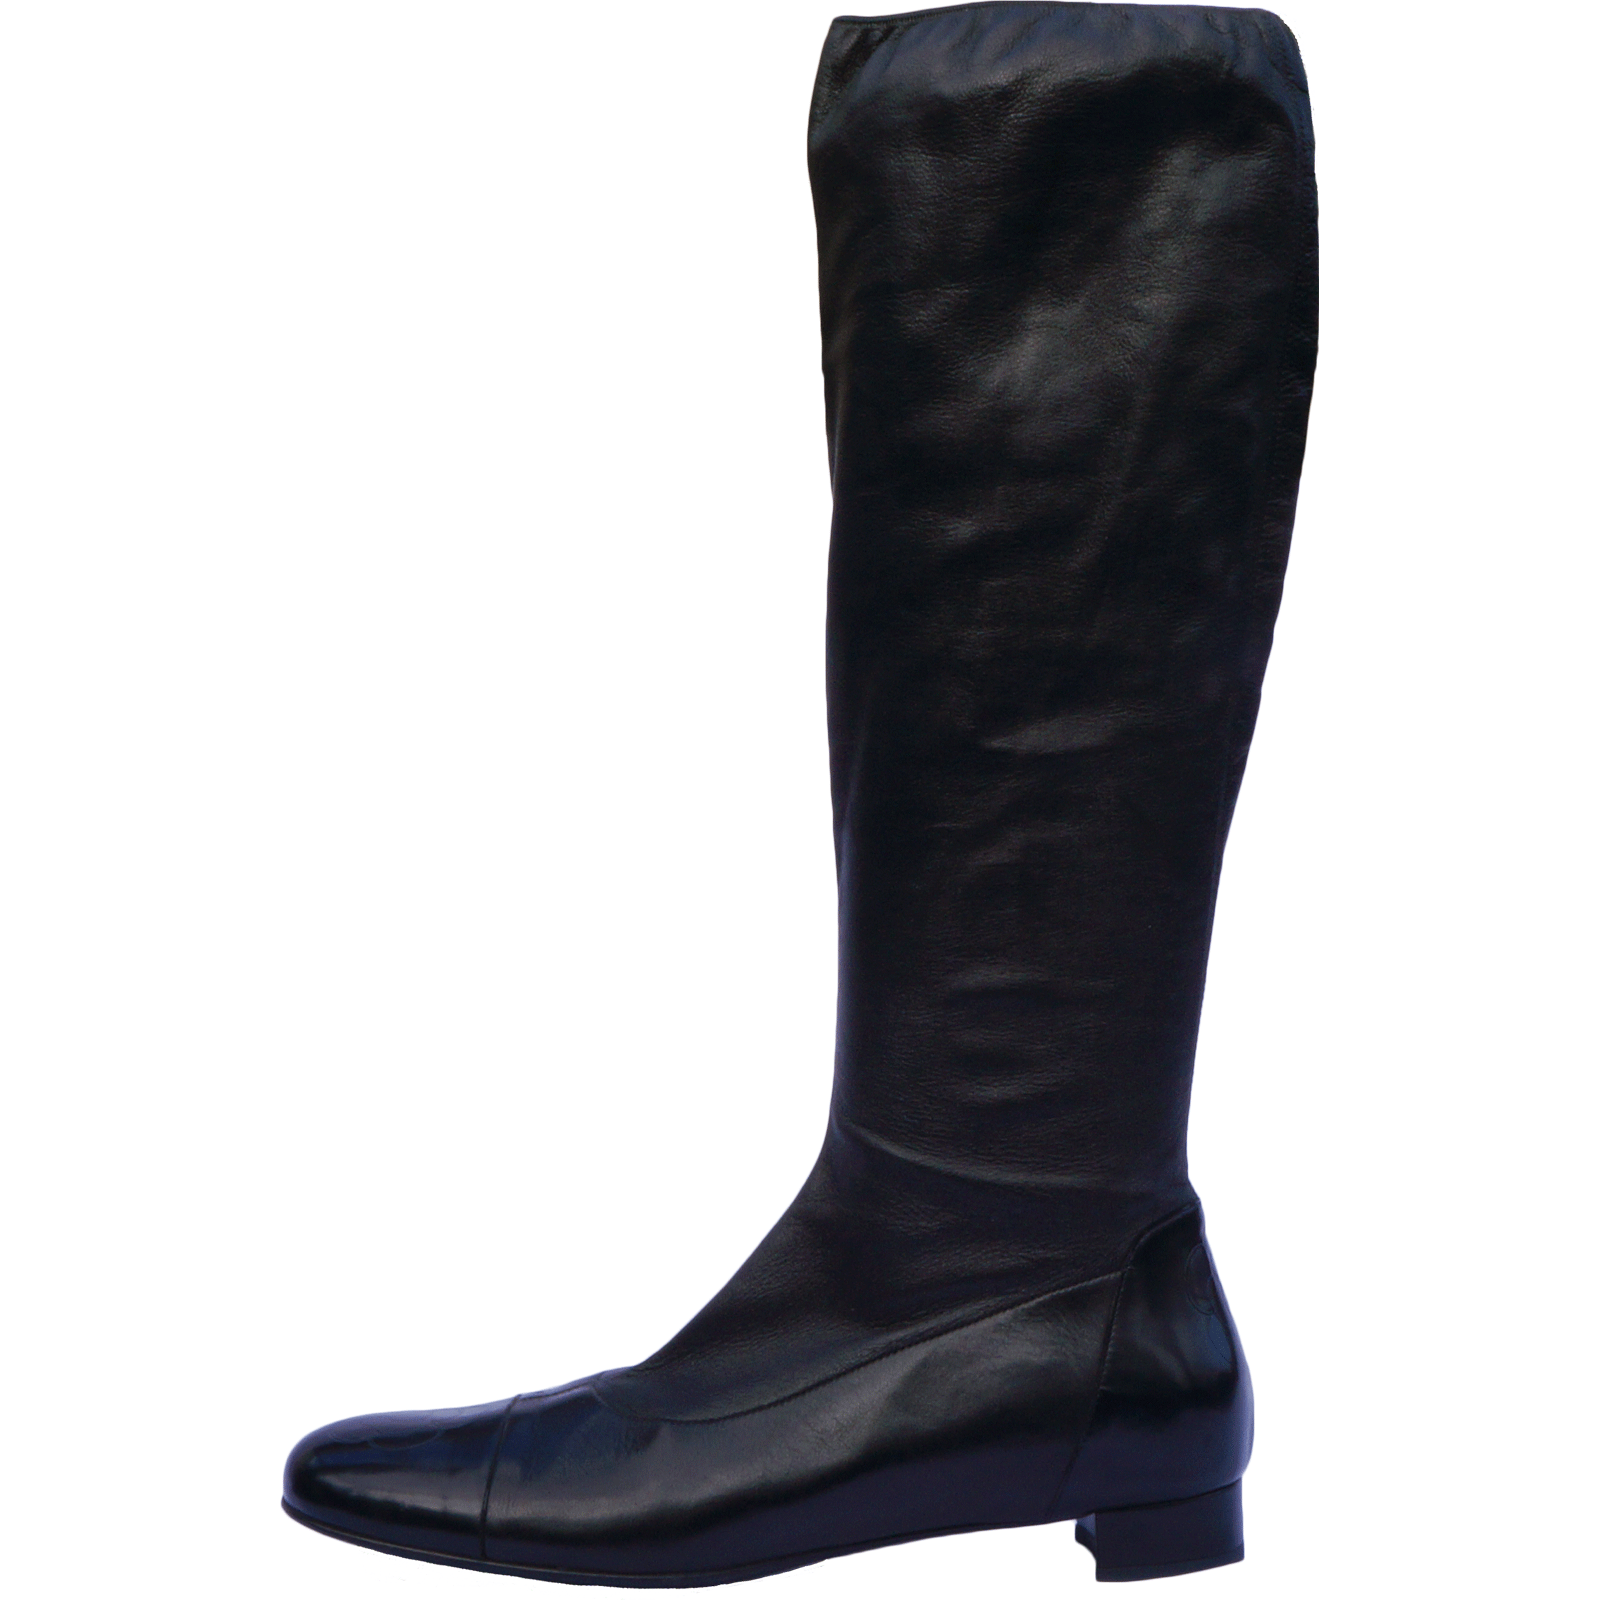 AUTHENTIC CHANEL LEATHER CAMELLIA CAP TOE KNEE-HIGH LEATHER BOOTS